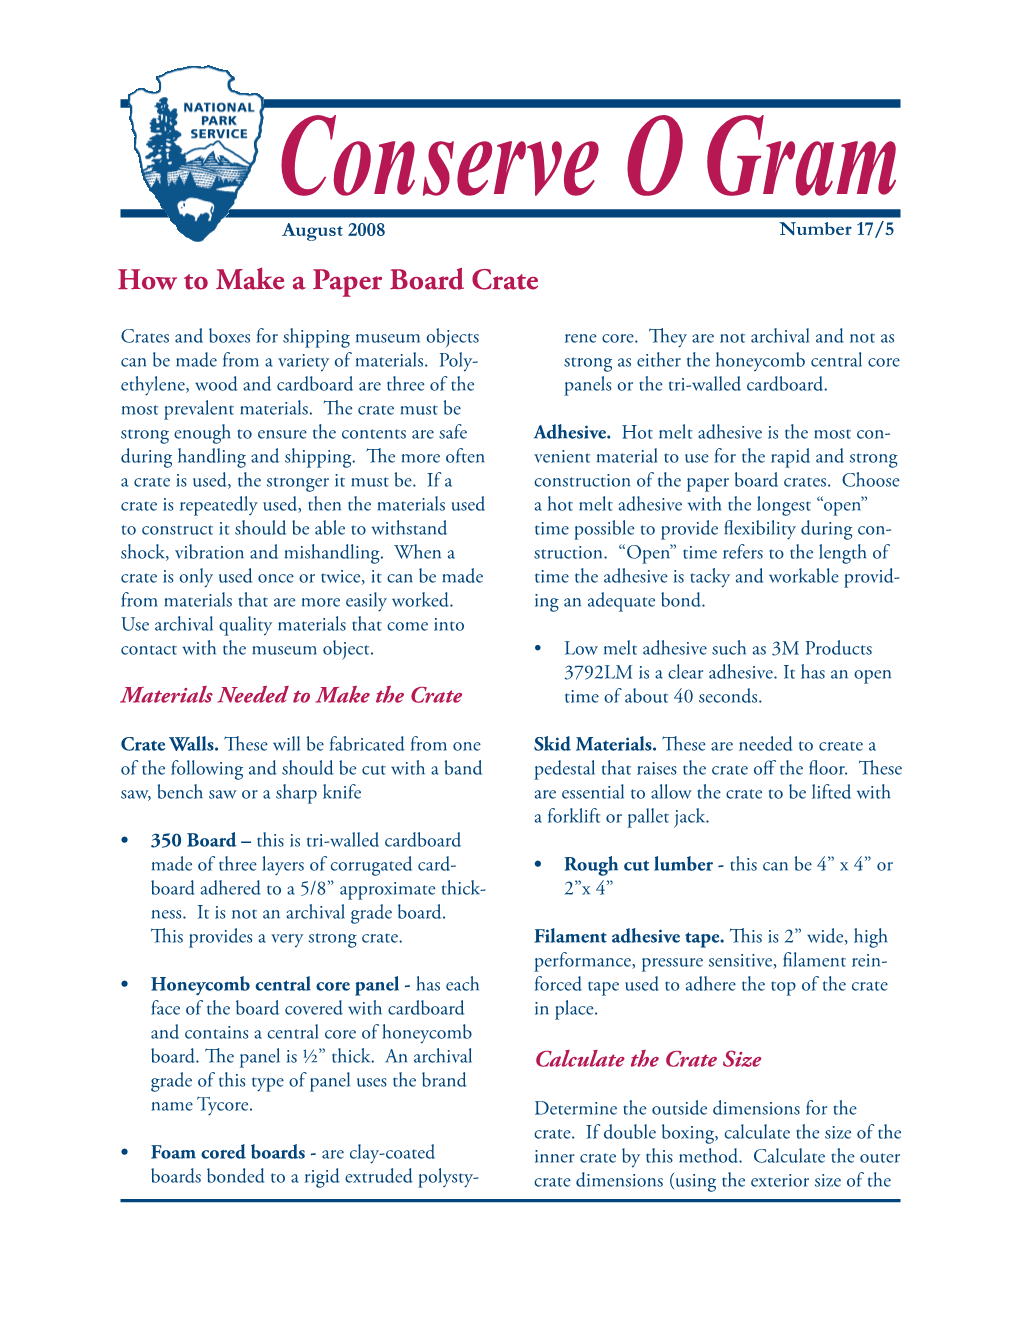 Conserve O Gram Volume 17 Issue 5: How to Make a Paper Board Crate